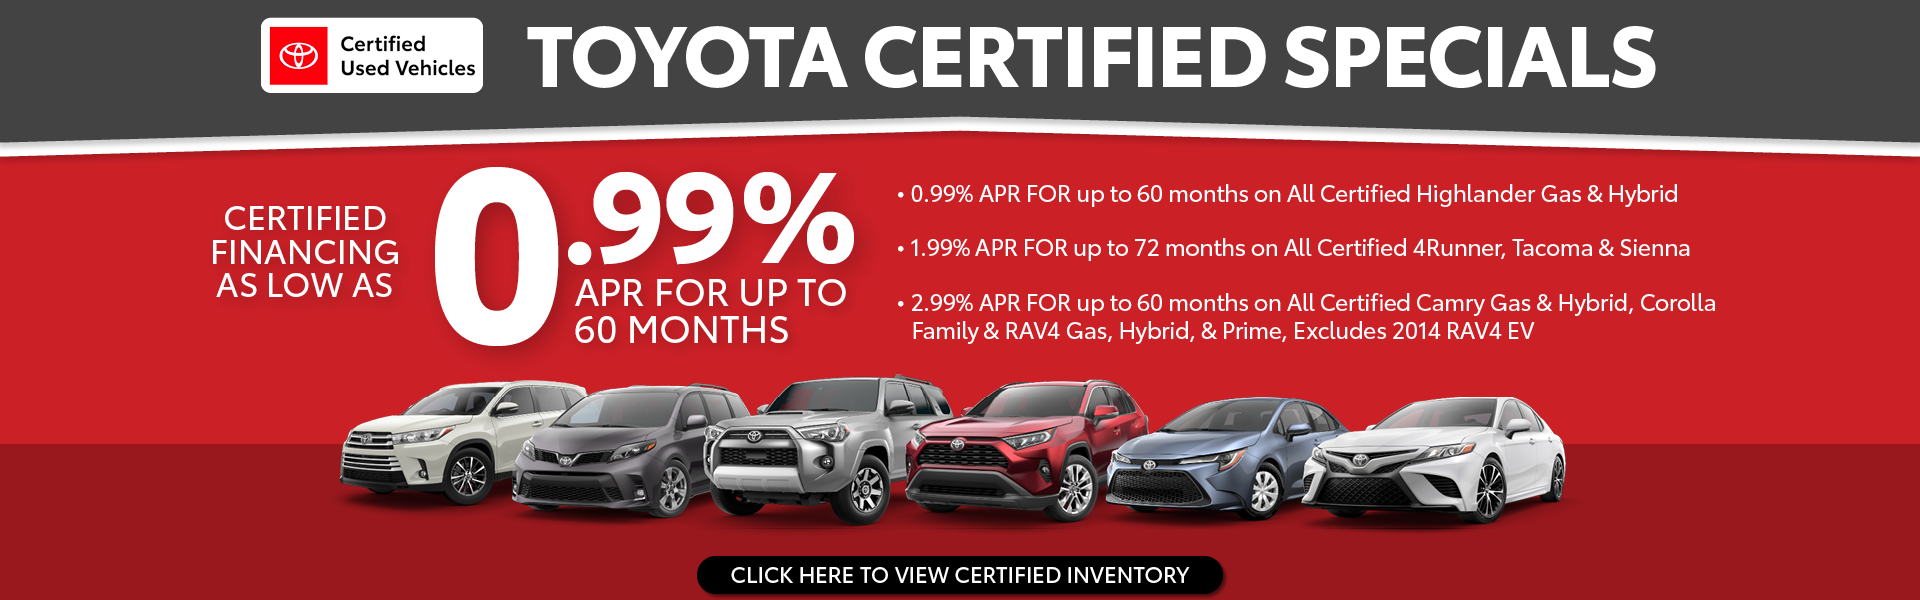 Purchase a Certified PreOwned Toyota from Passport Toyota with